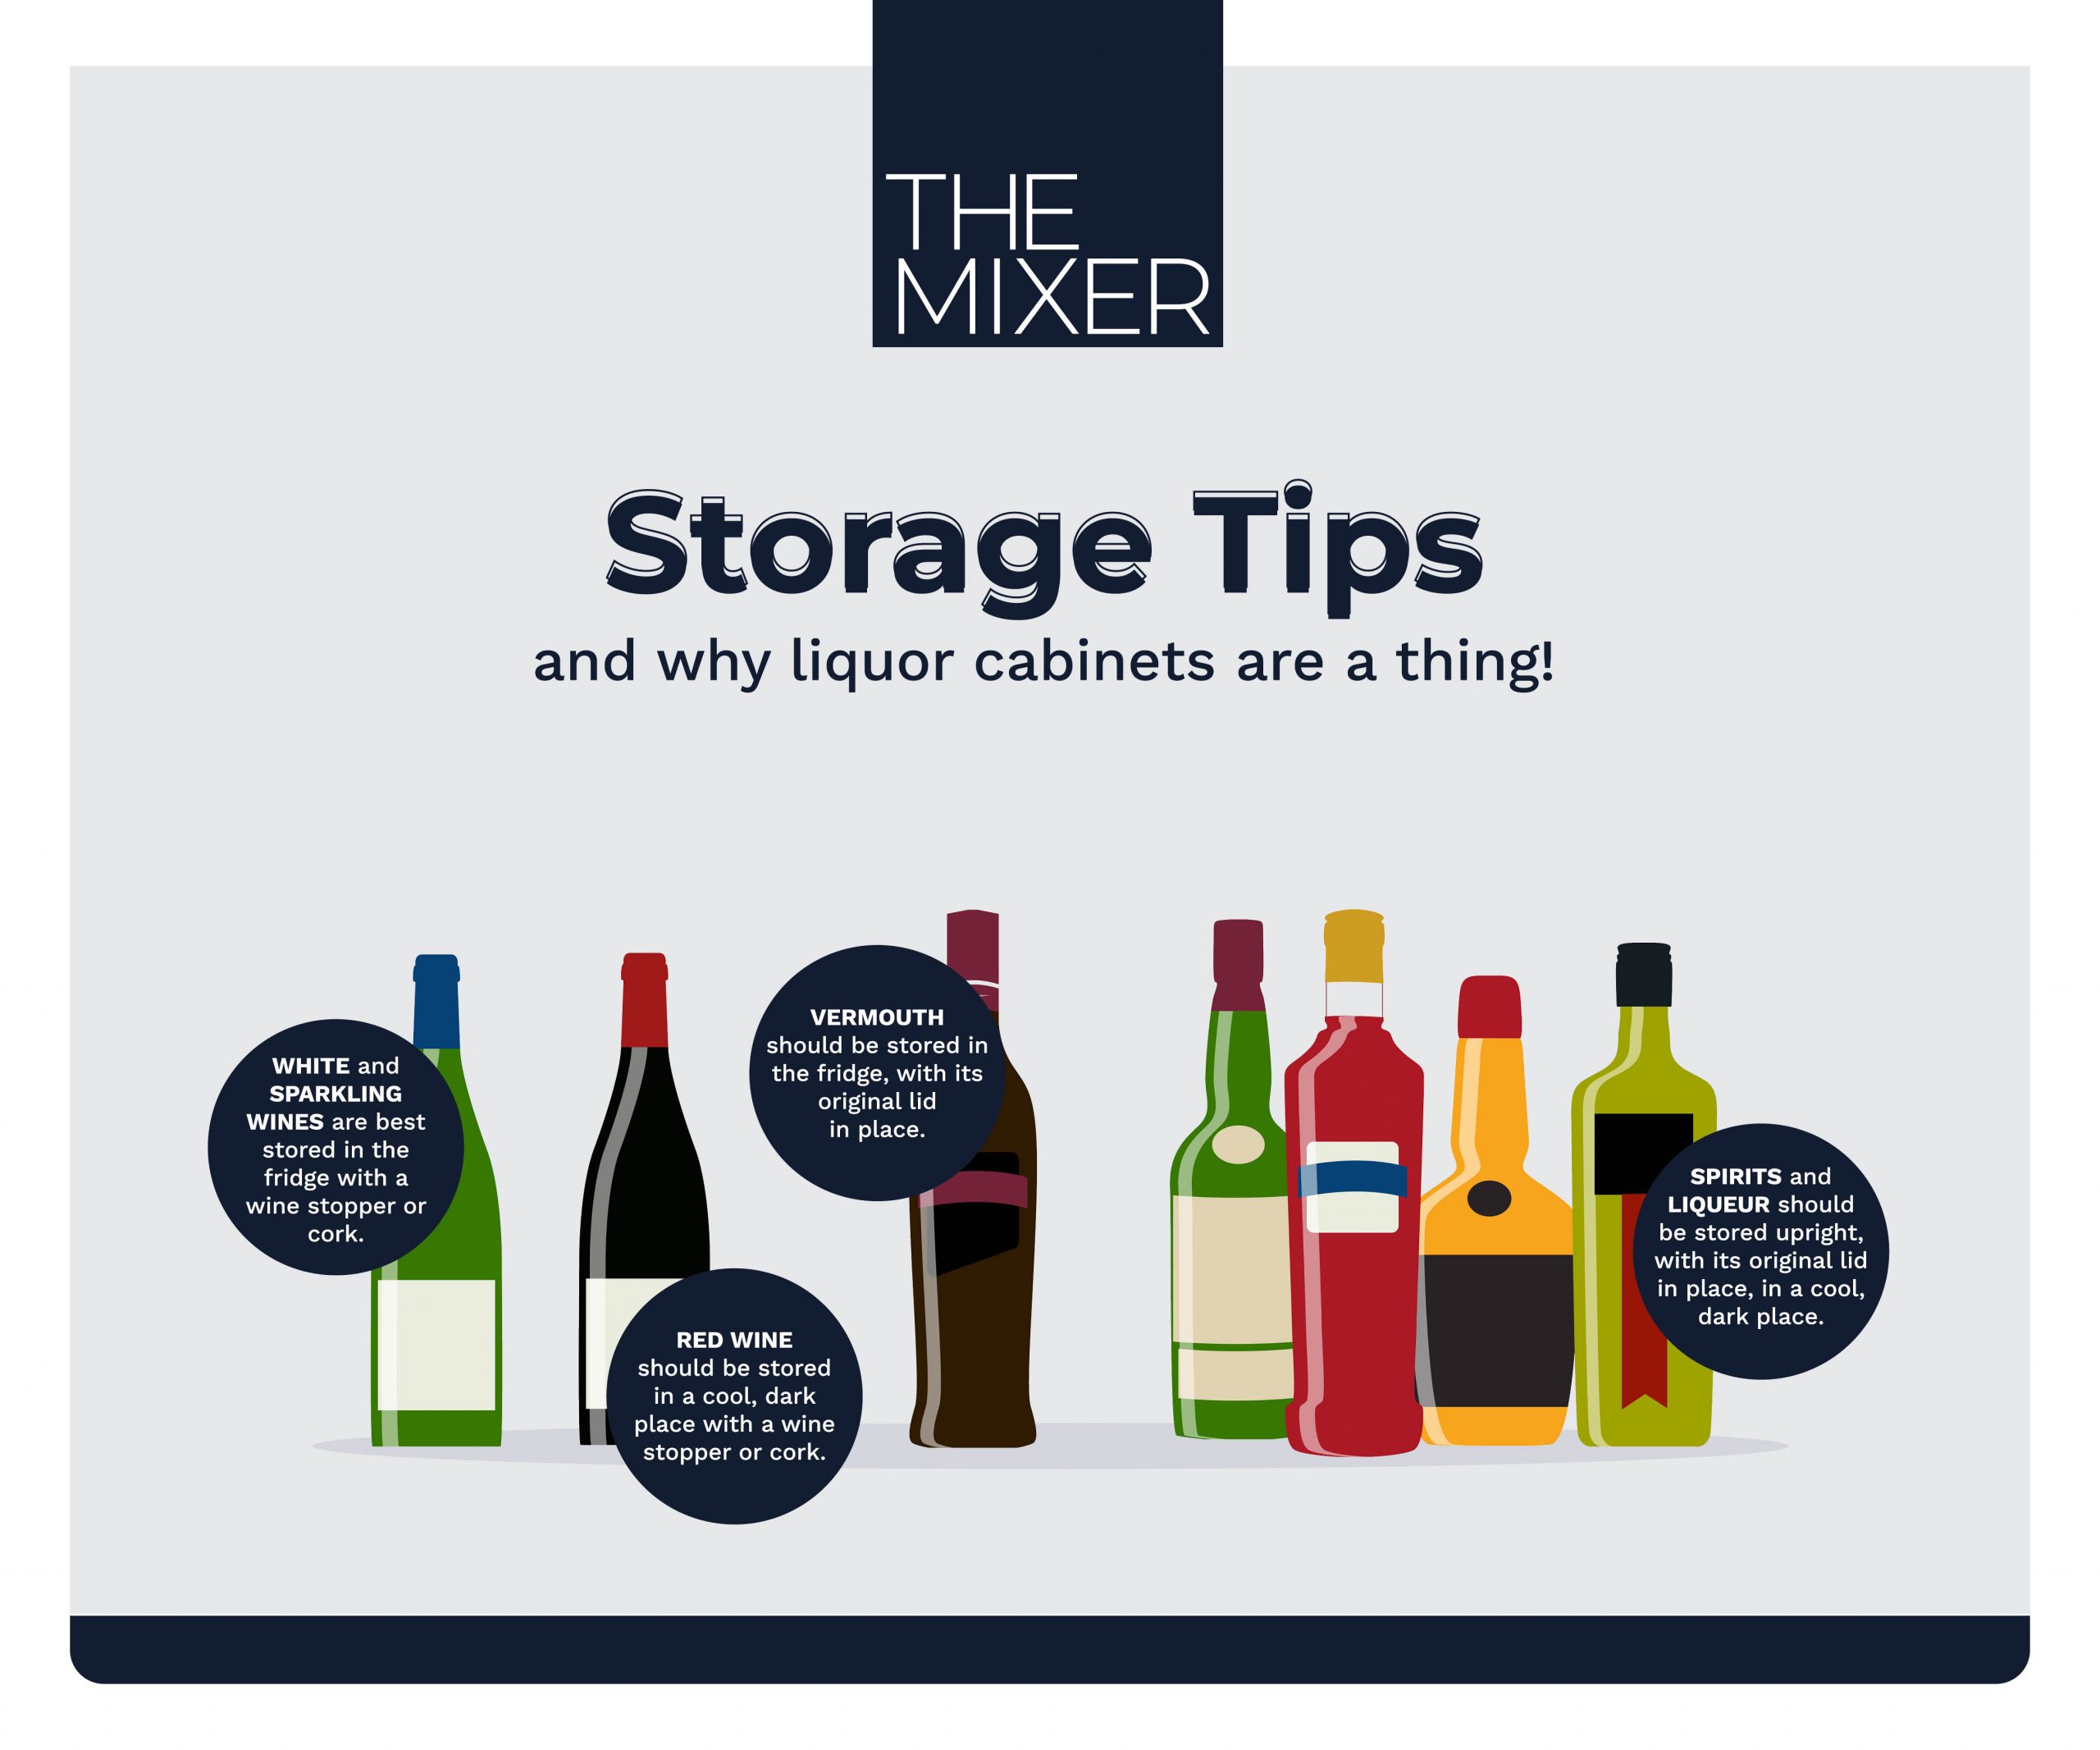 illustration showing storage tips for different alcohol types